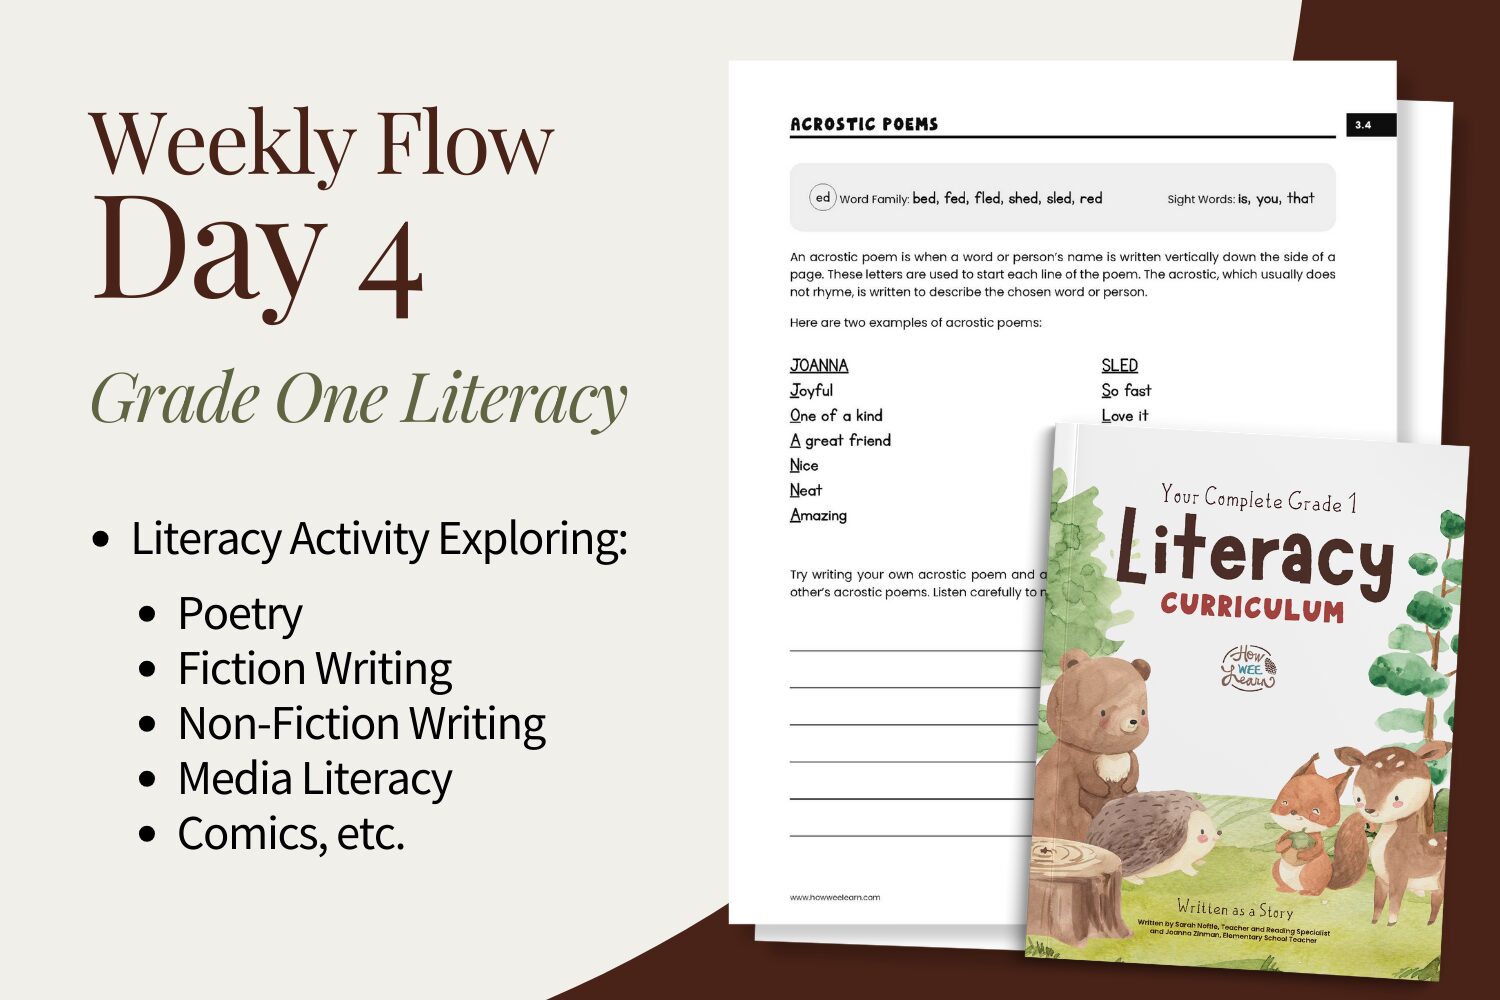 Grade One Literacy: Weekly Flow, Day 4 - Literacy Activity that explores: Poetry, Fiction Writing, Non-Fiction Writing, Media Literacy, Comics, etc.